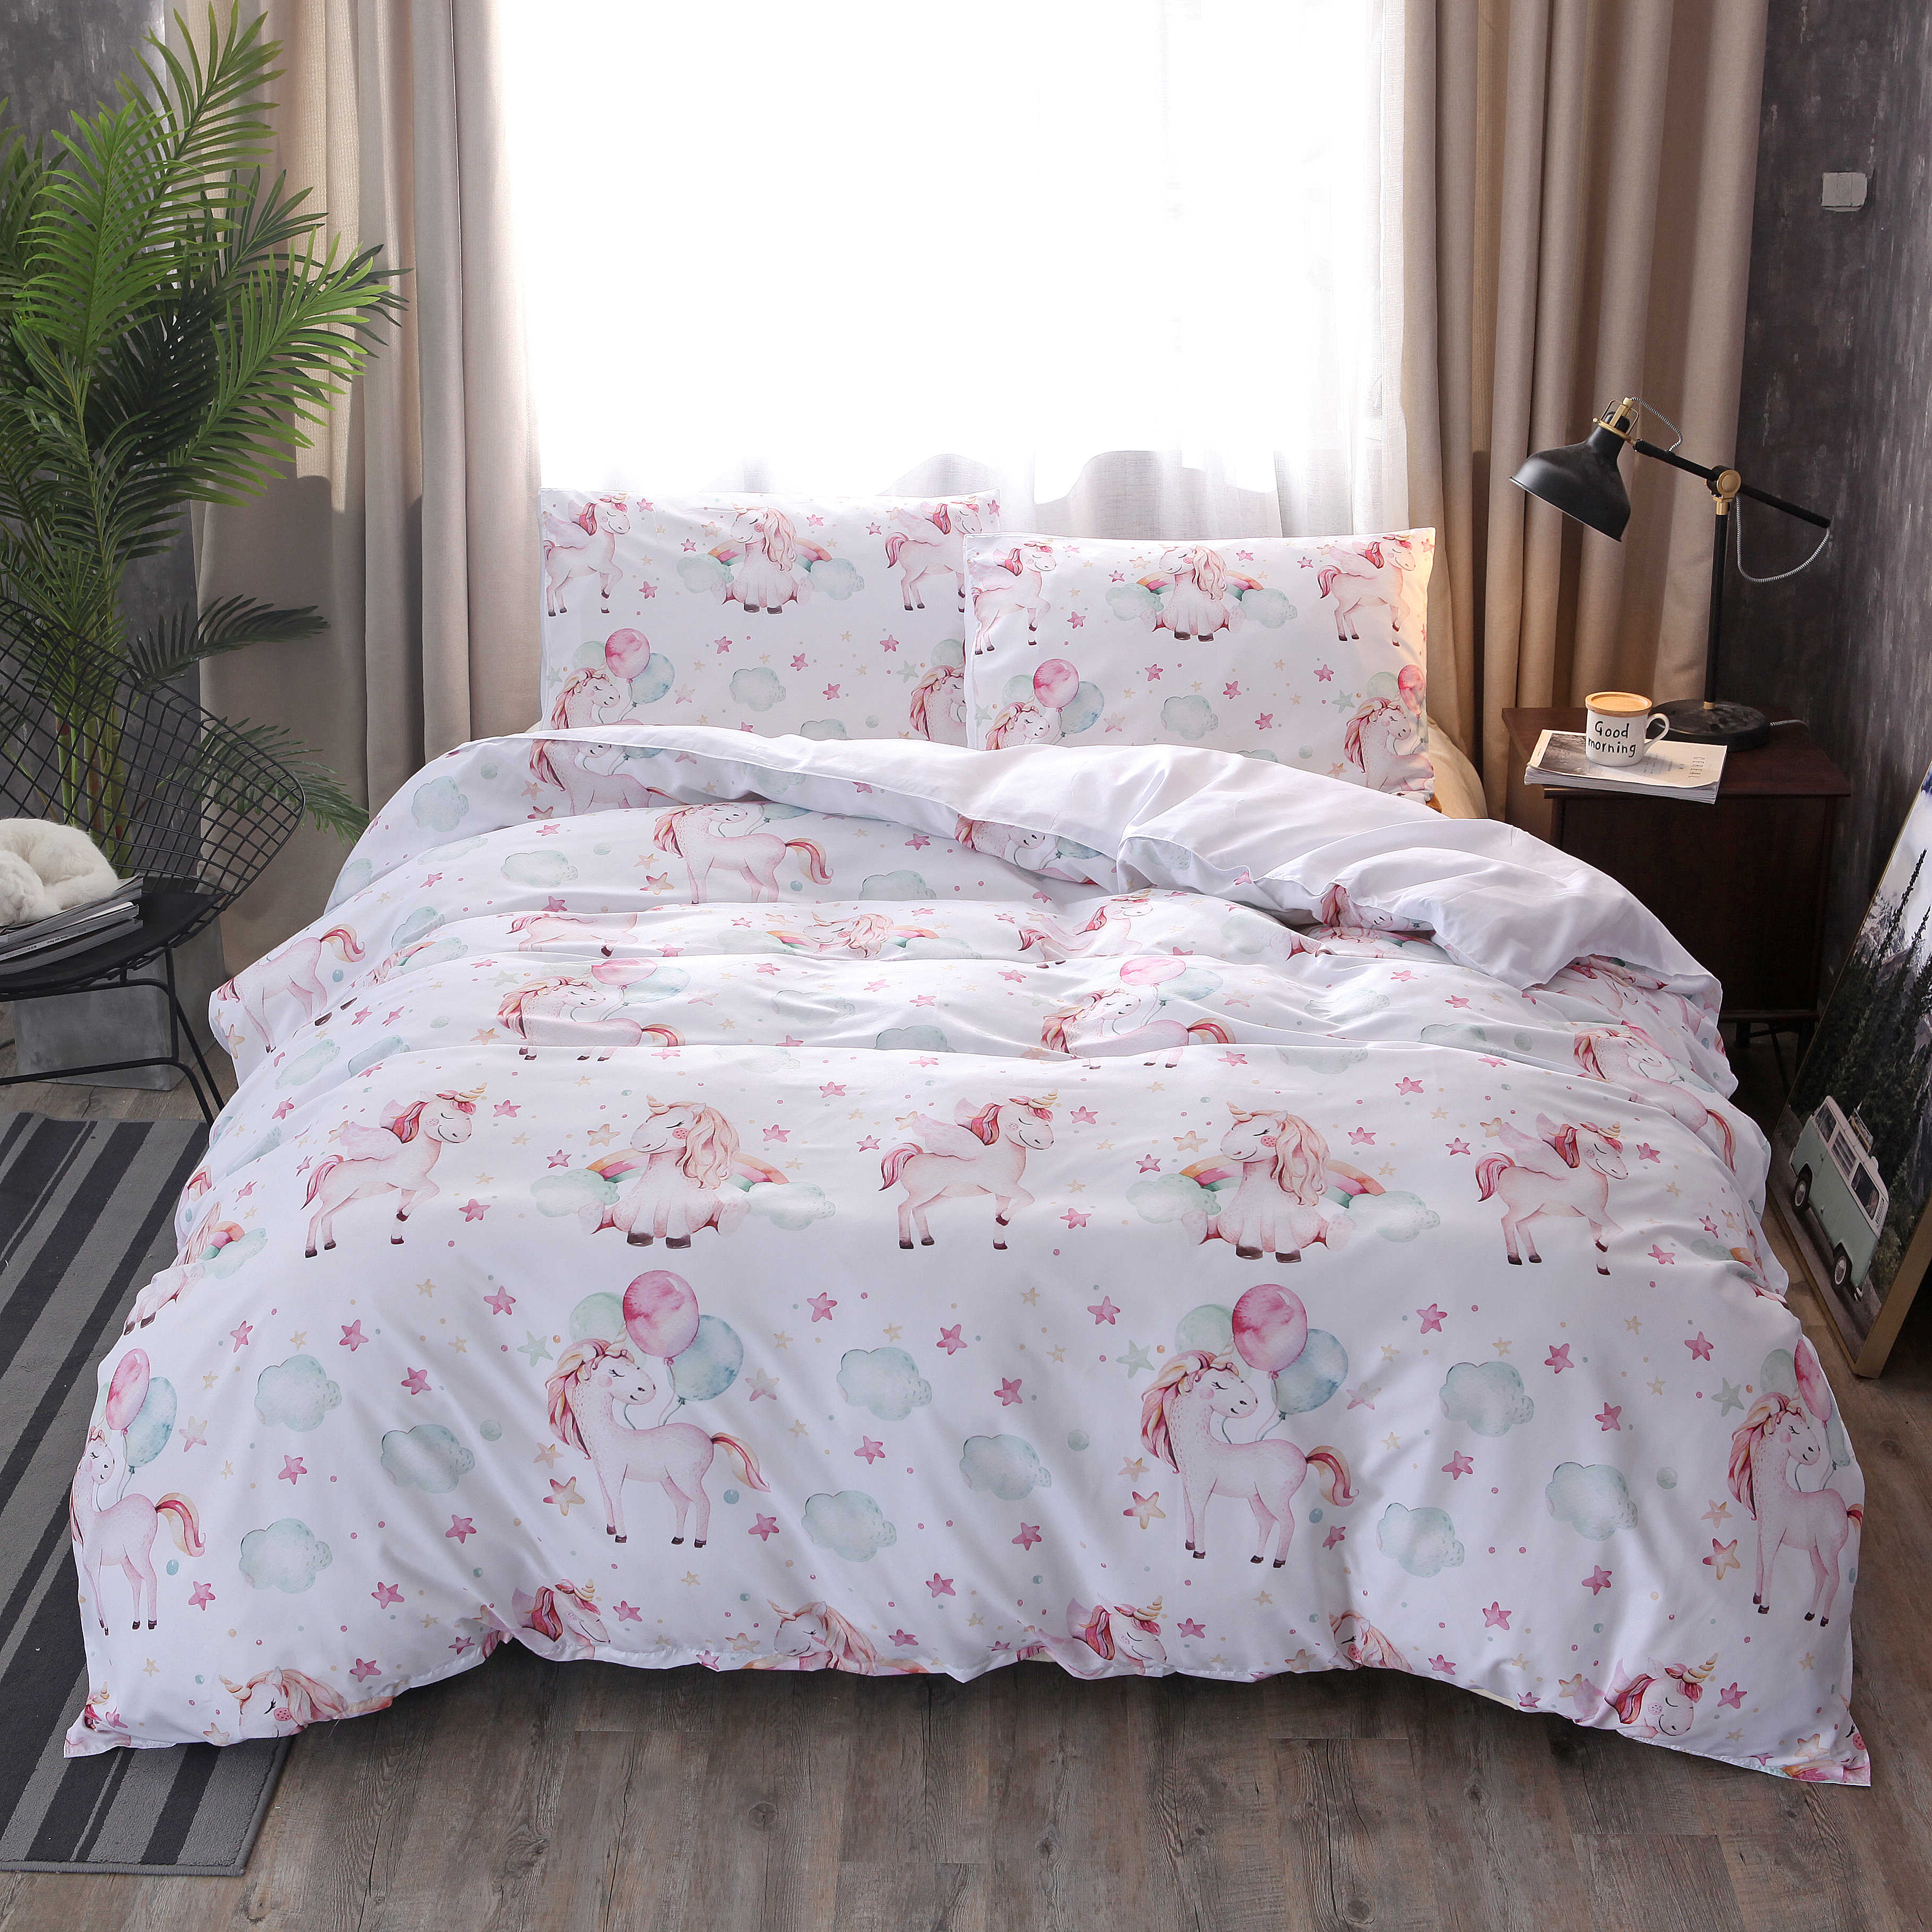 

3 PCS Bedding Sets Animal Small Horse Printing Quilt Cover Pillowcase For Queen Size